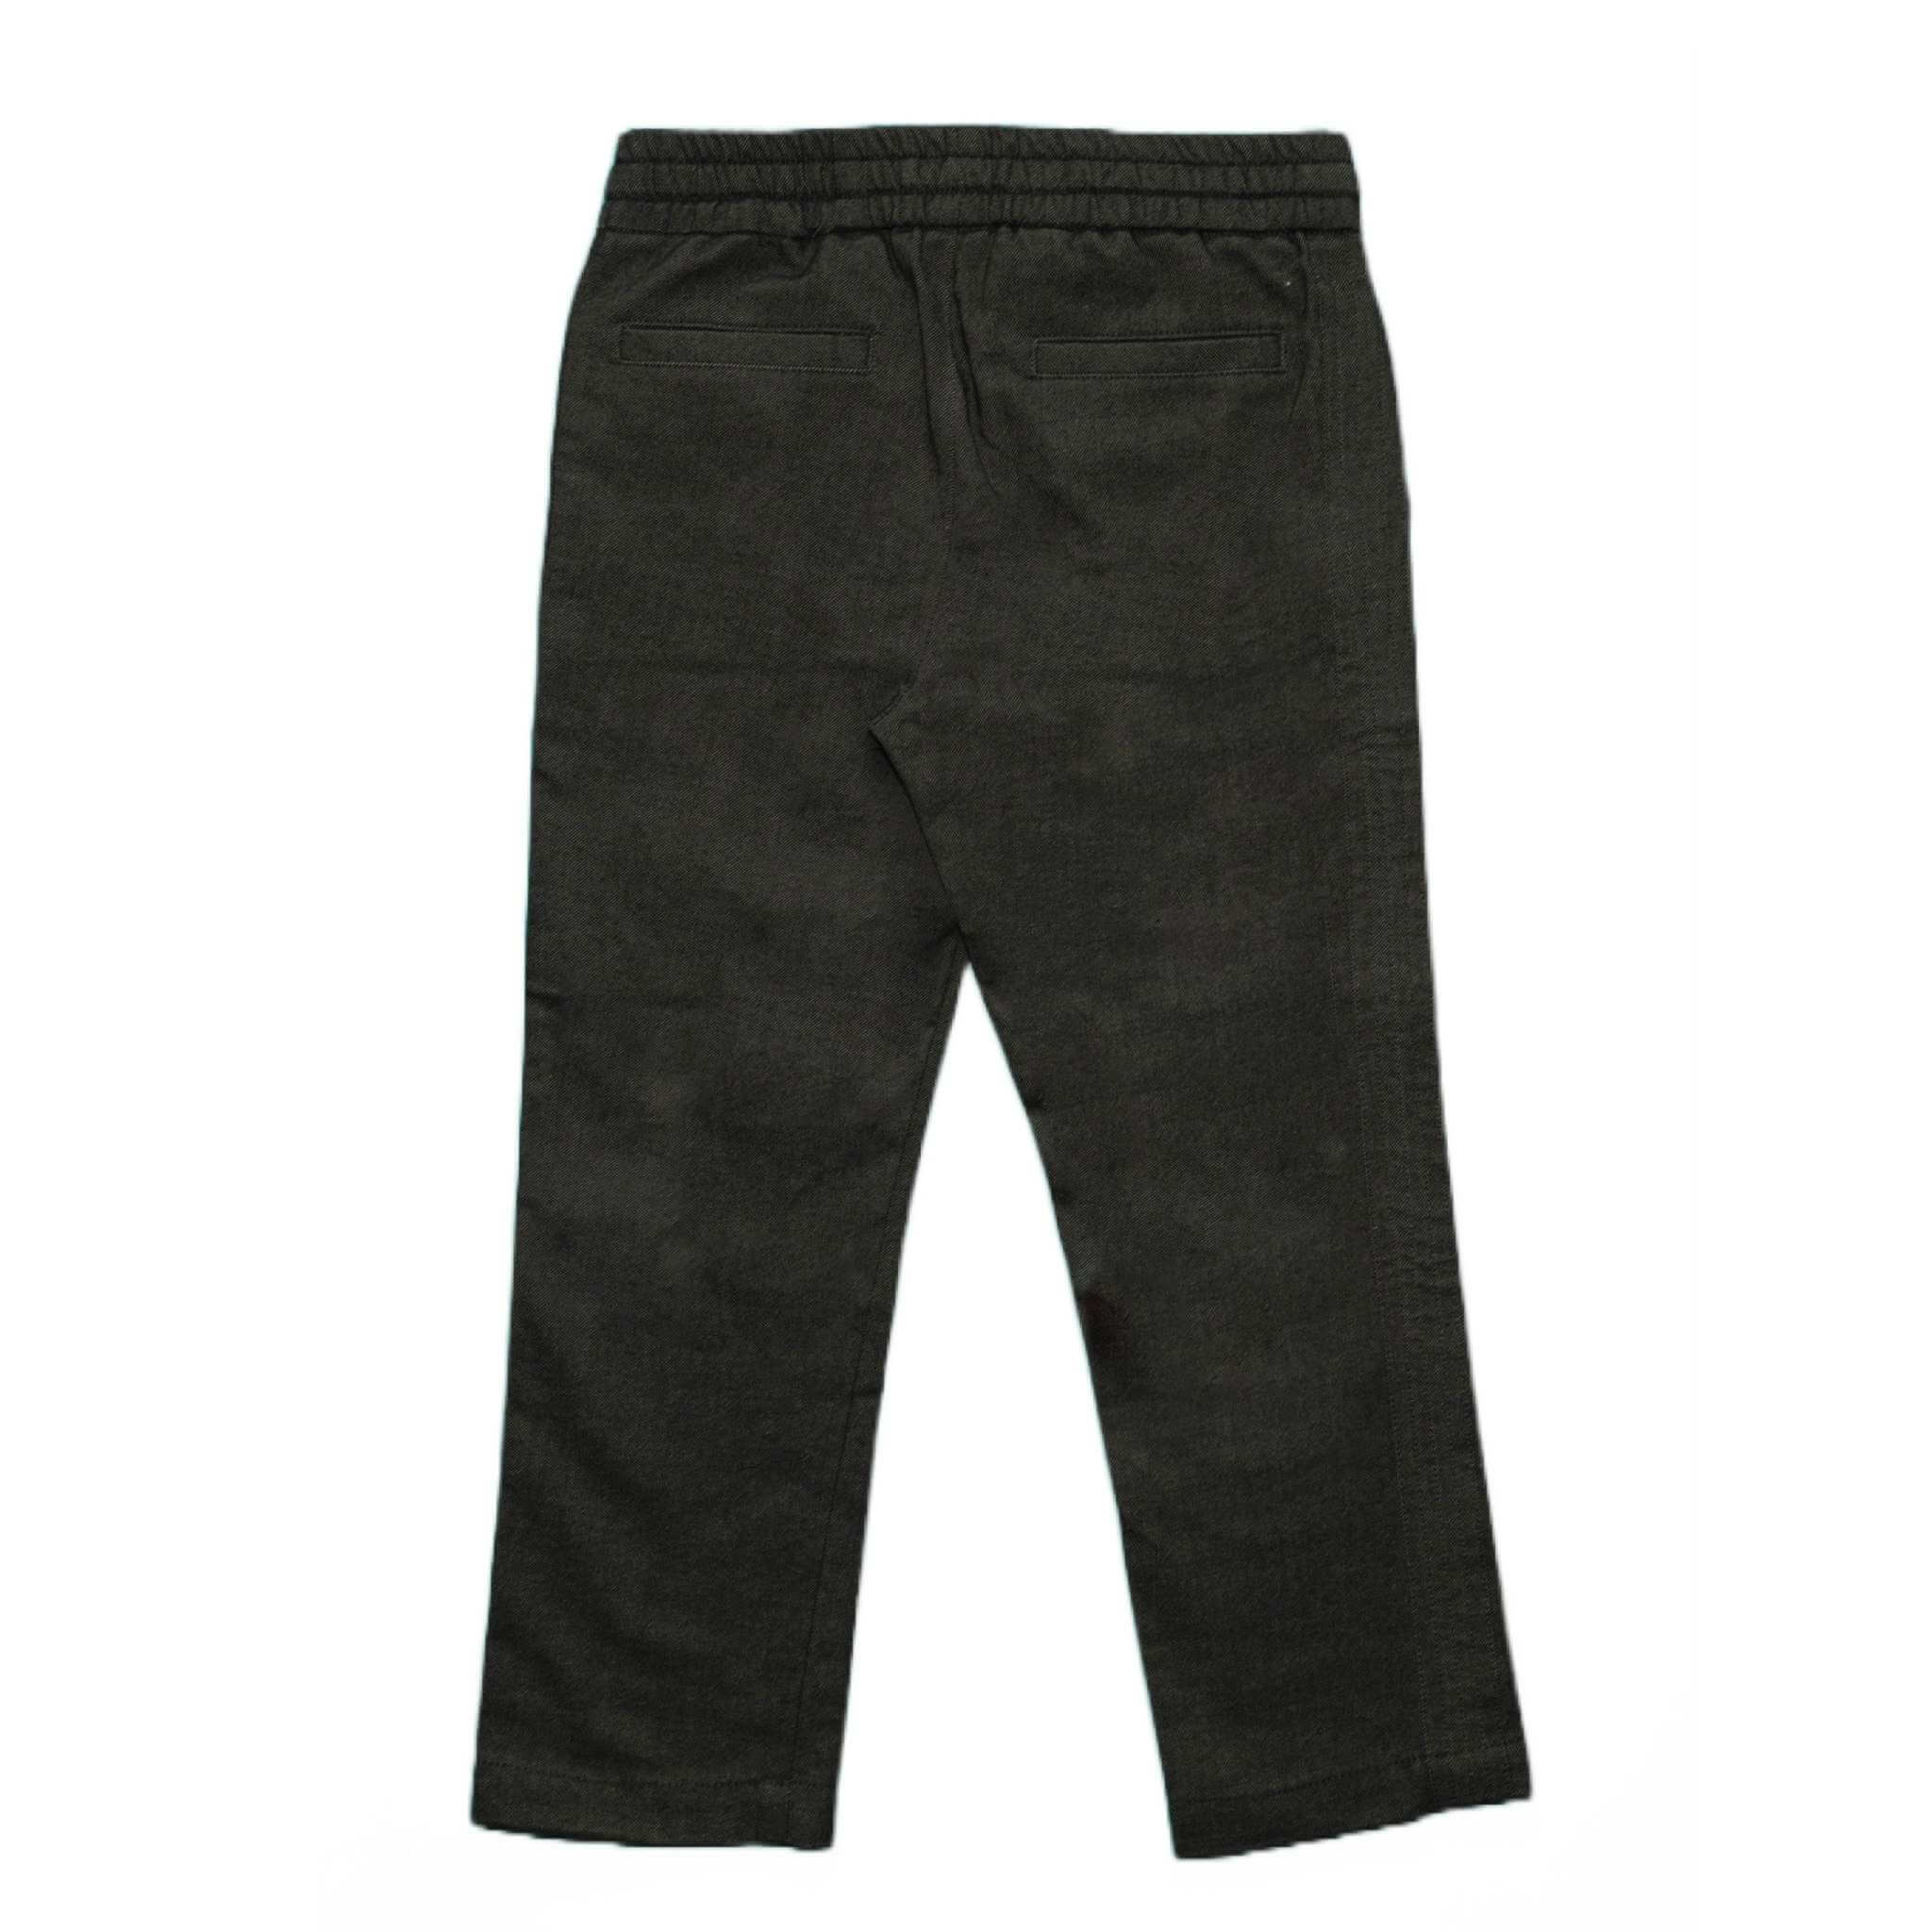 The perfect jean from our Kids Essentials collection (view from the back). Soft Denim Pants in Dark Gray, made of 100% organic Japanese cotton for sustainable and high-quality fashion.